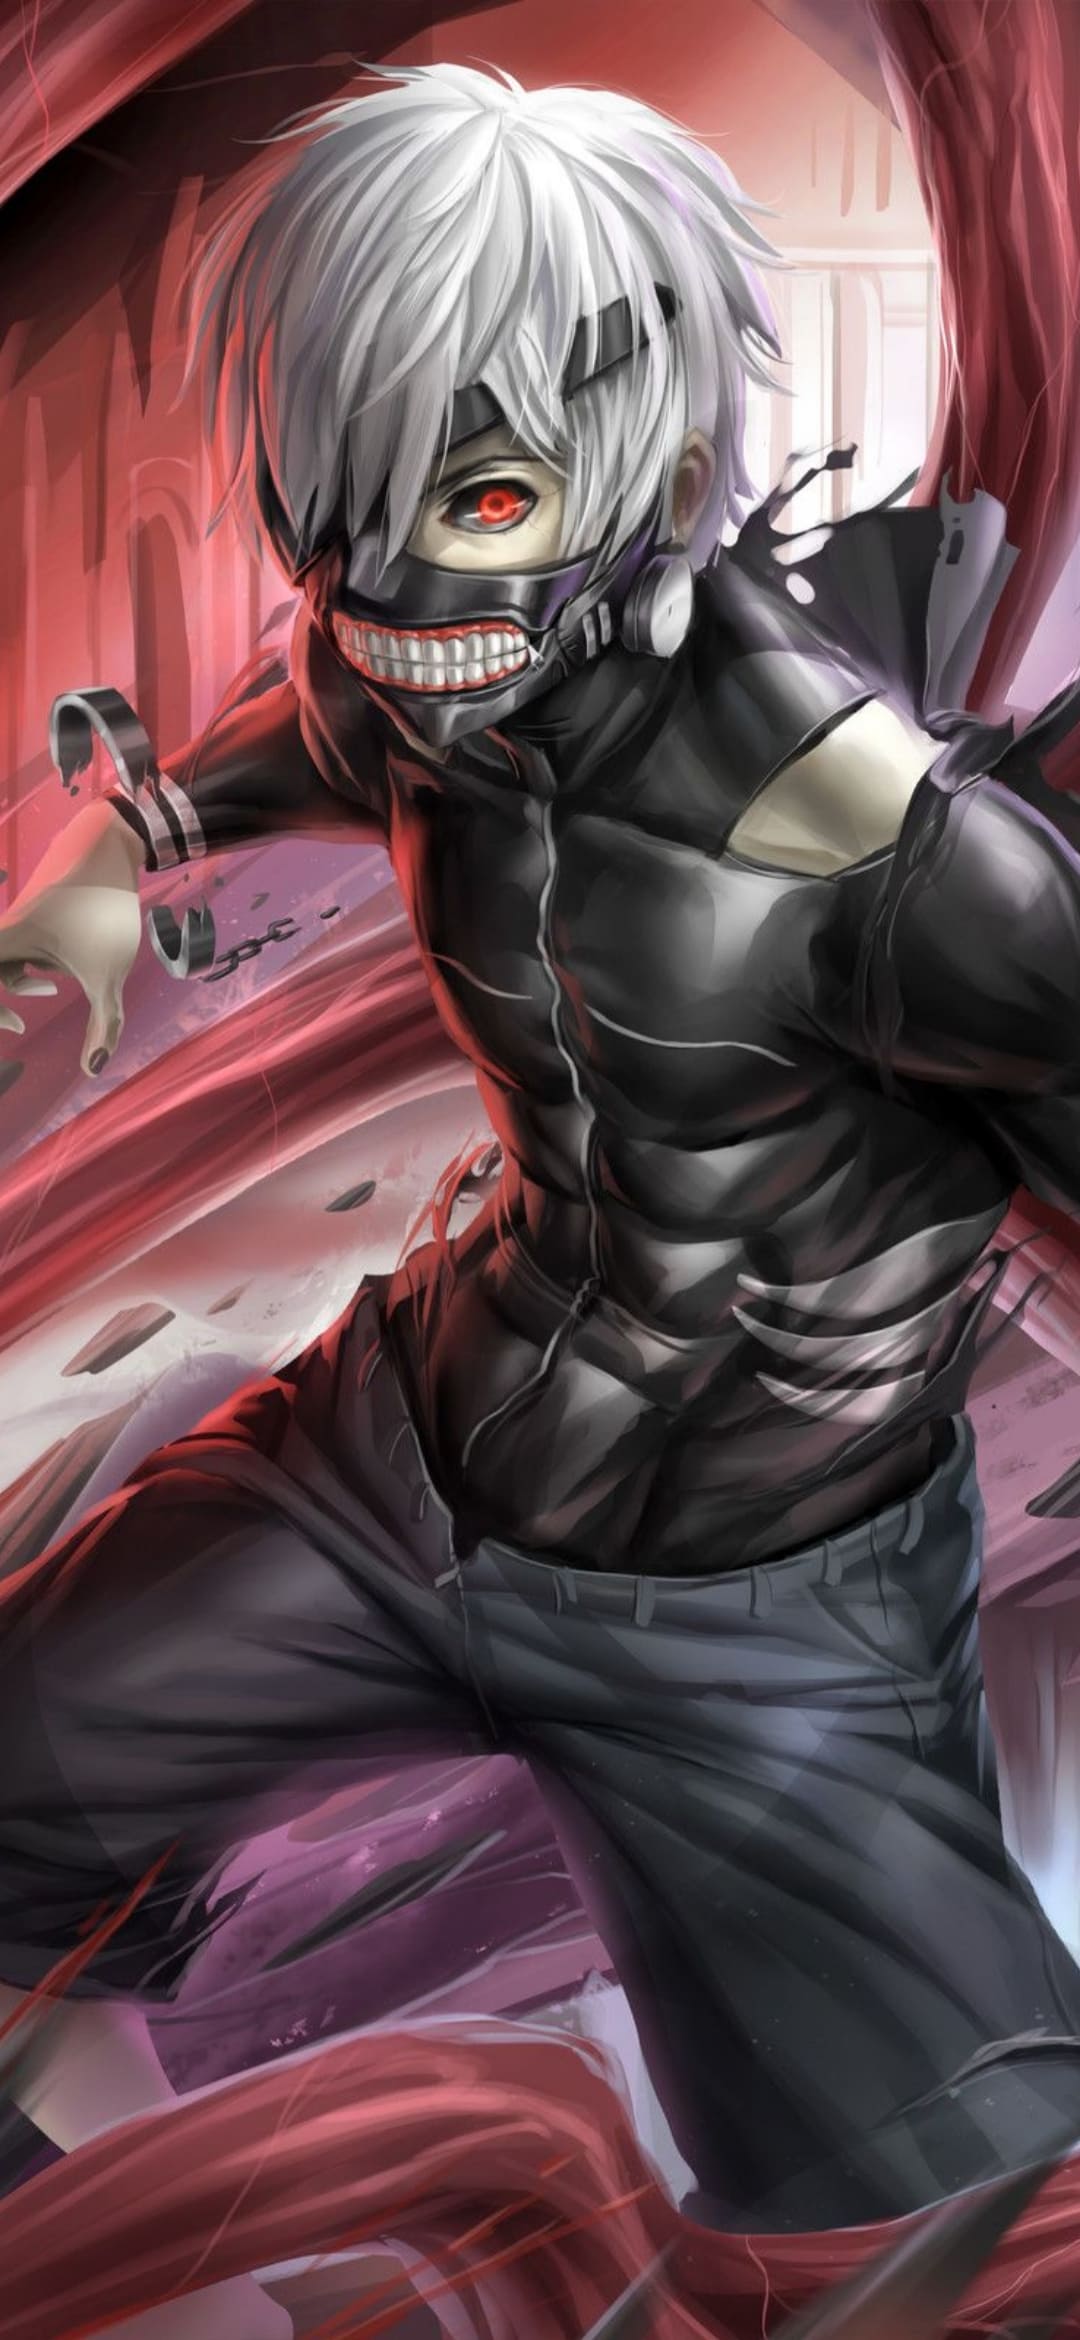 Tokyo Ghoul Android Wallpapers Top Free Tokyo Ghoul Android Backgrounds Wallpaperaccess